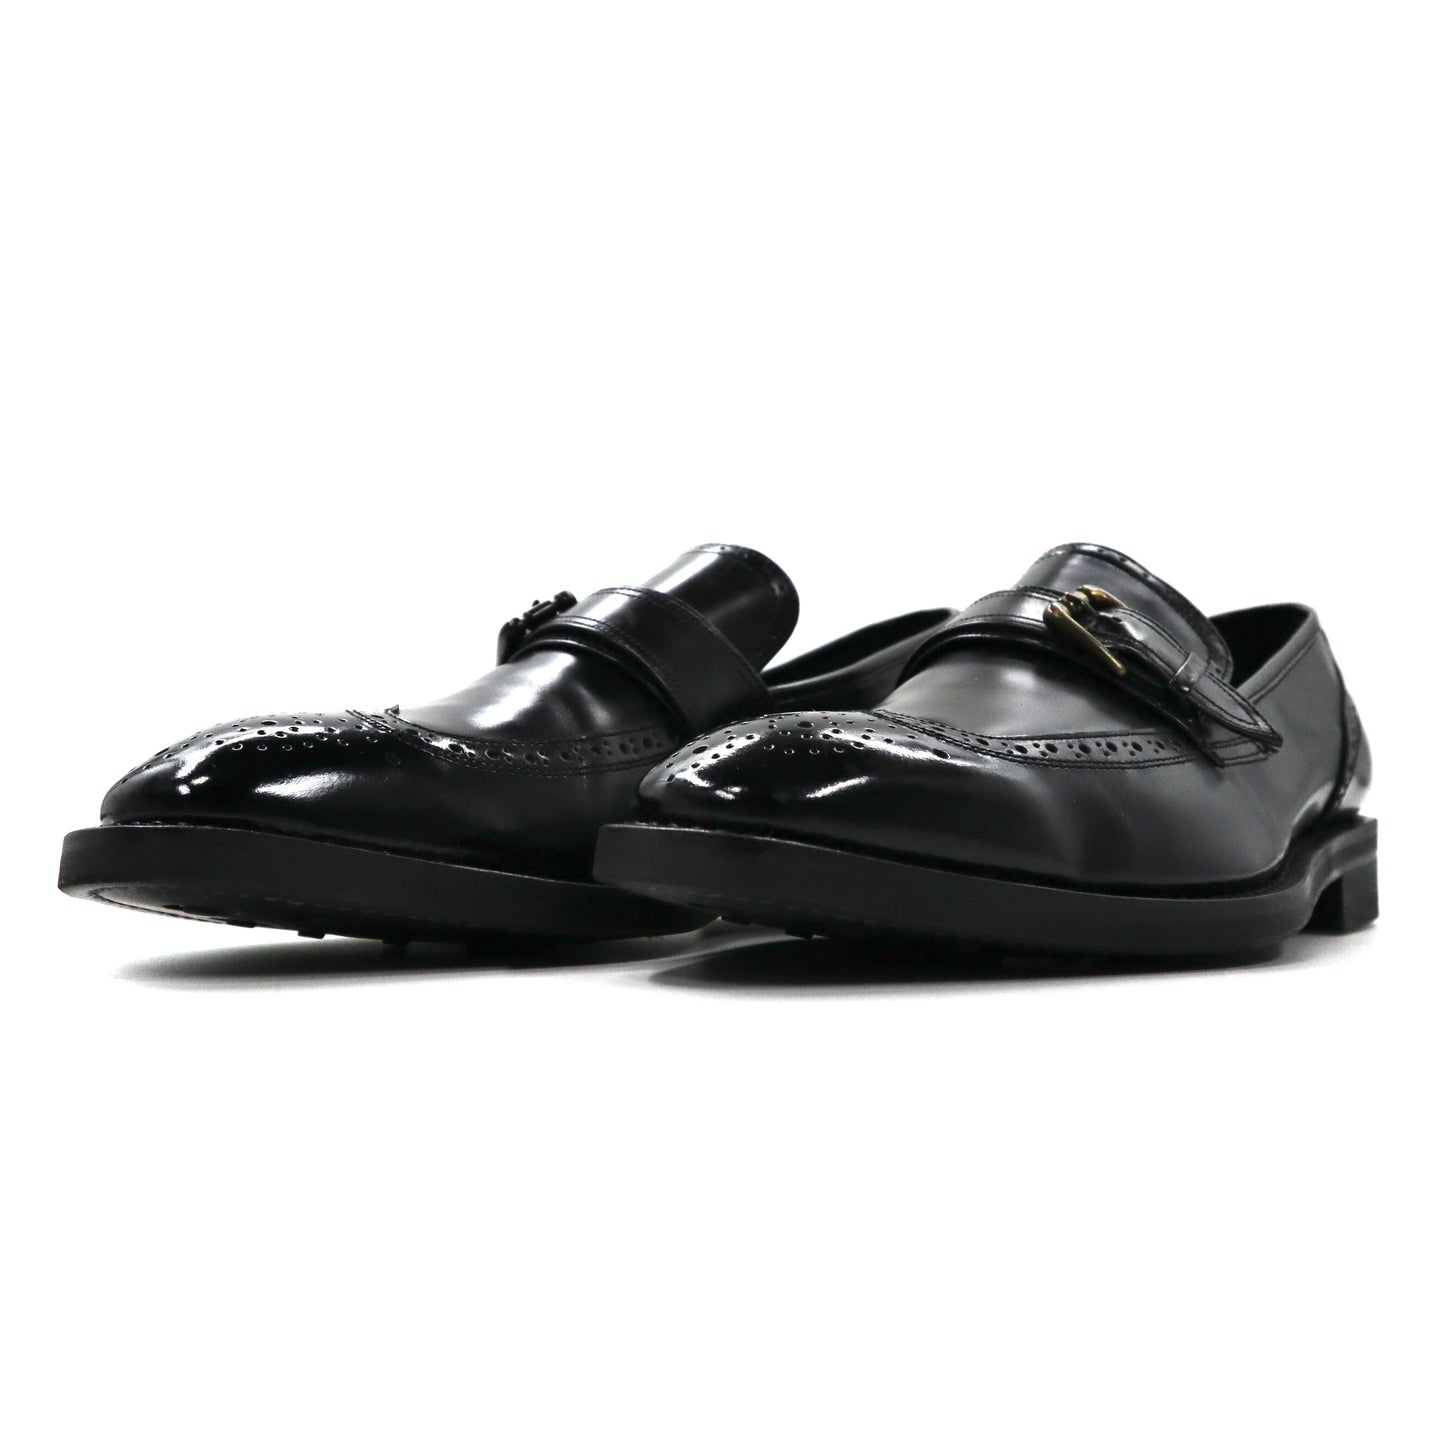 DAKS Wing Chip LOAFERS Medallion Shoes US8.5 Black Leather 